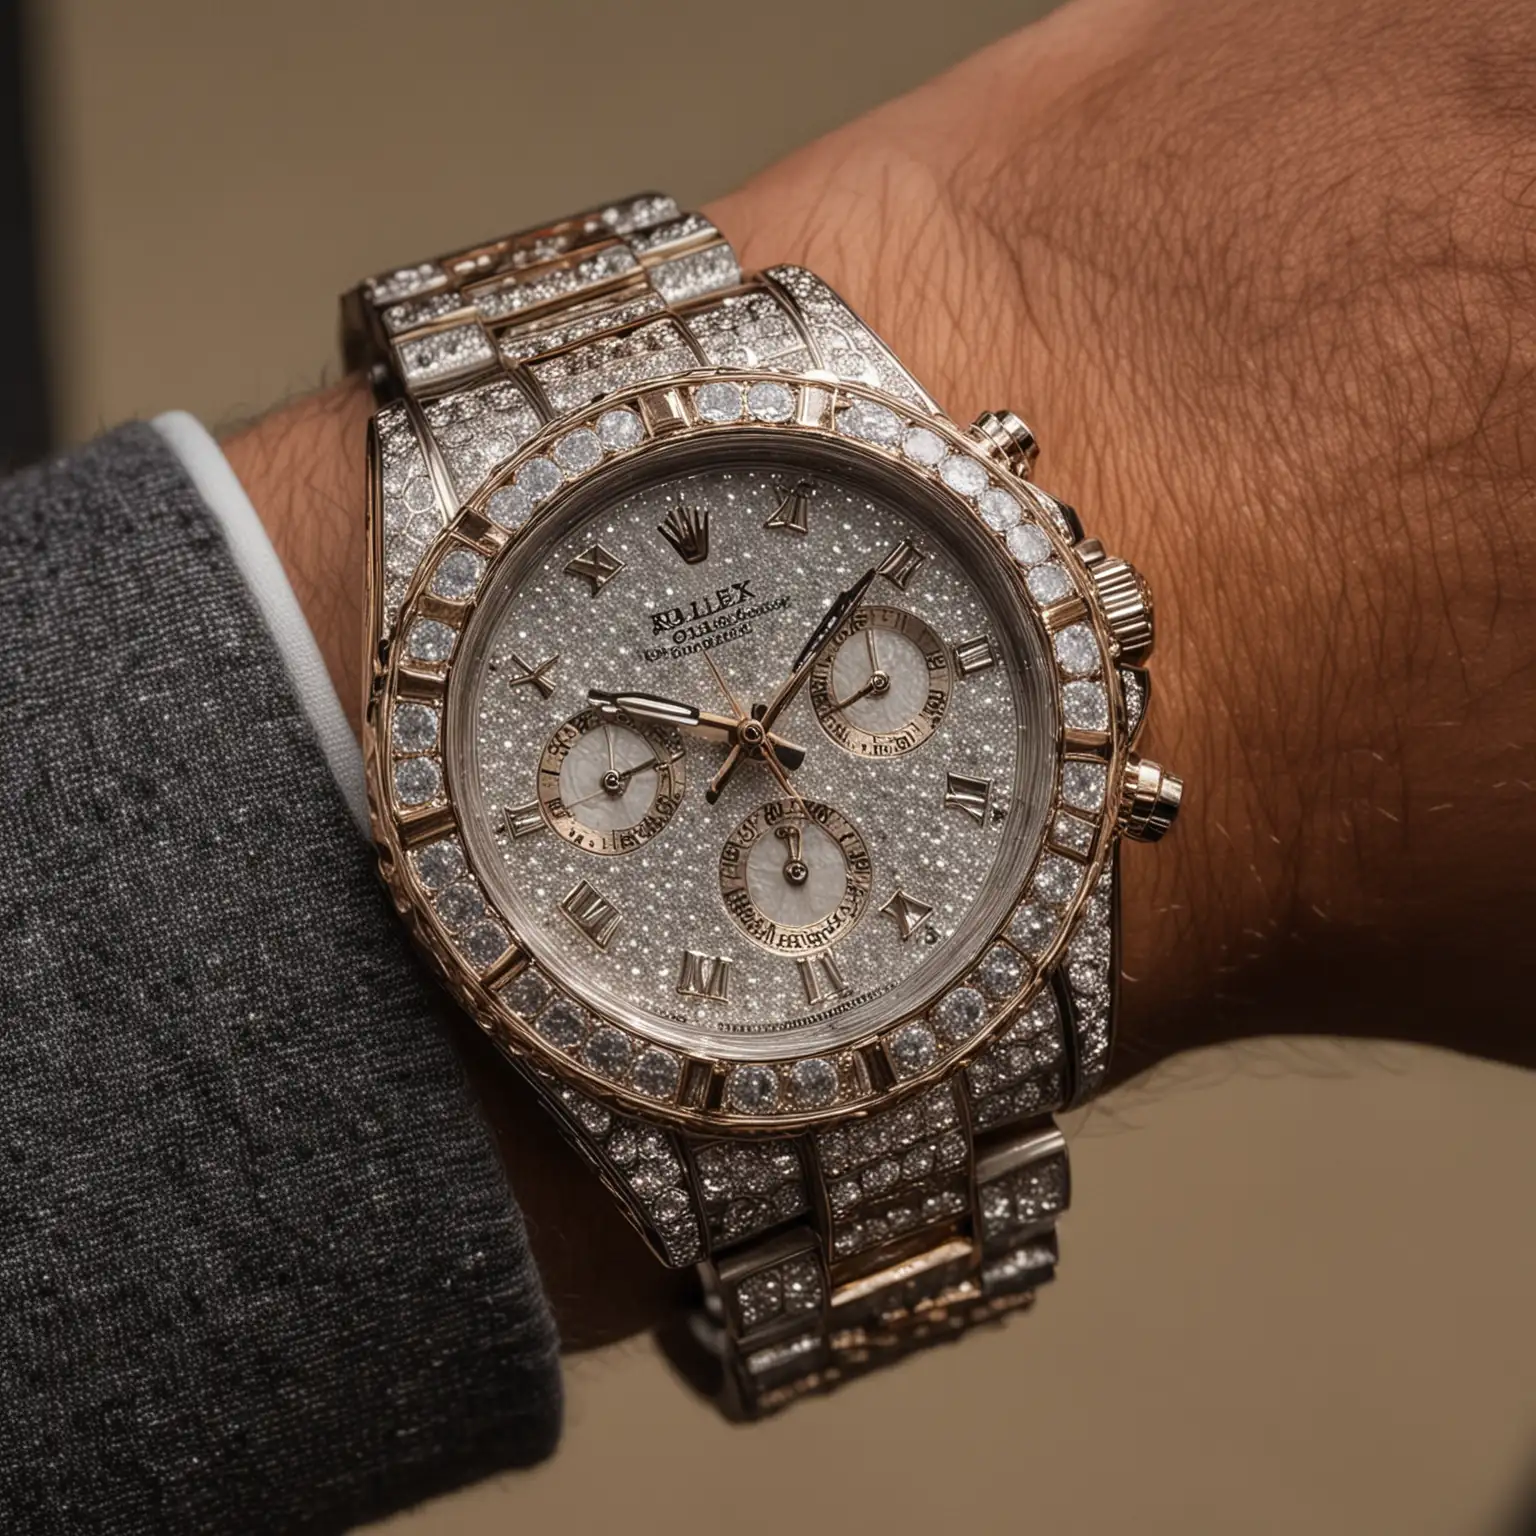 close up of an expensive Rolex watch with diamonds on it on the arm of a hispanic man who is outside, dramatic lighting